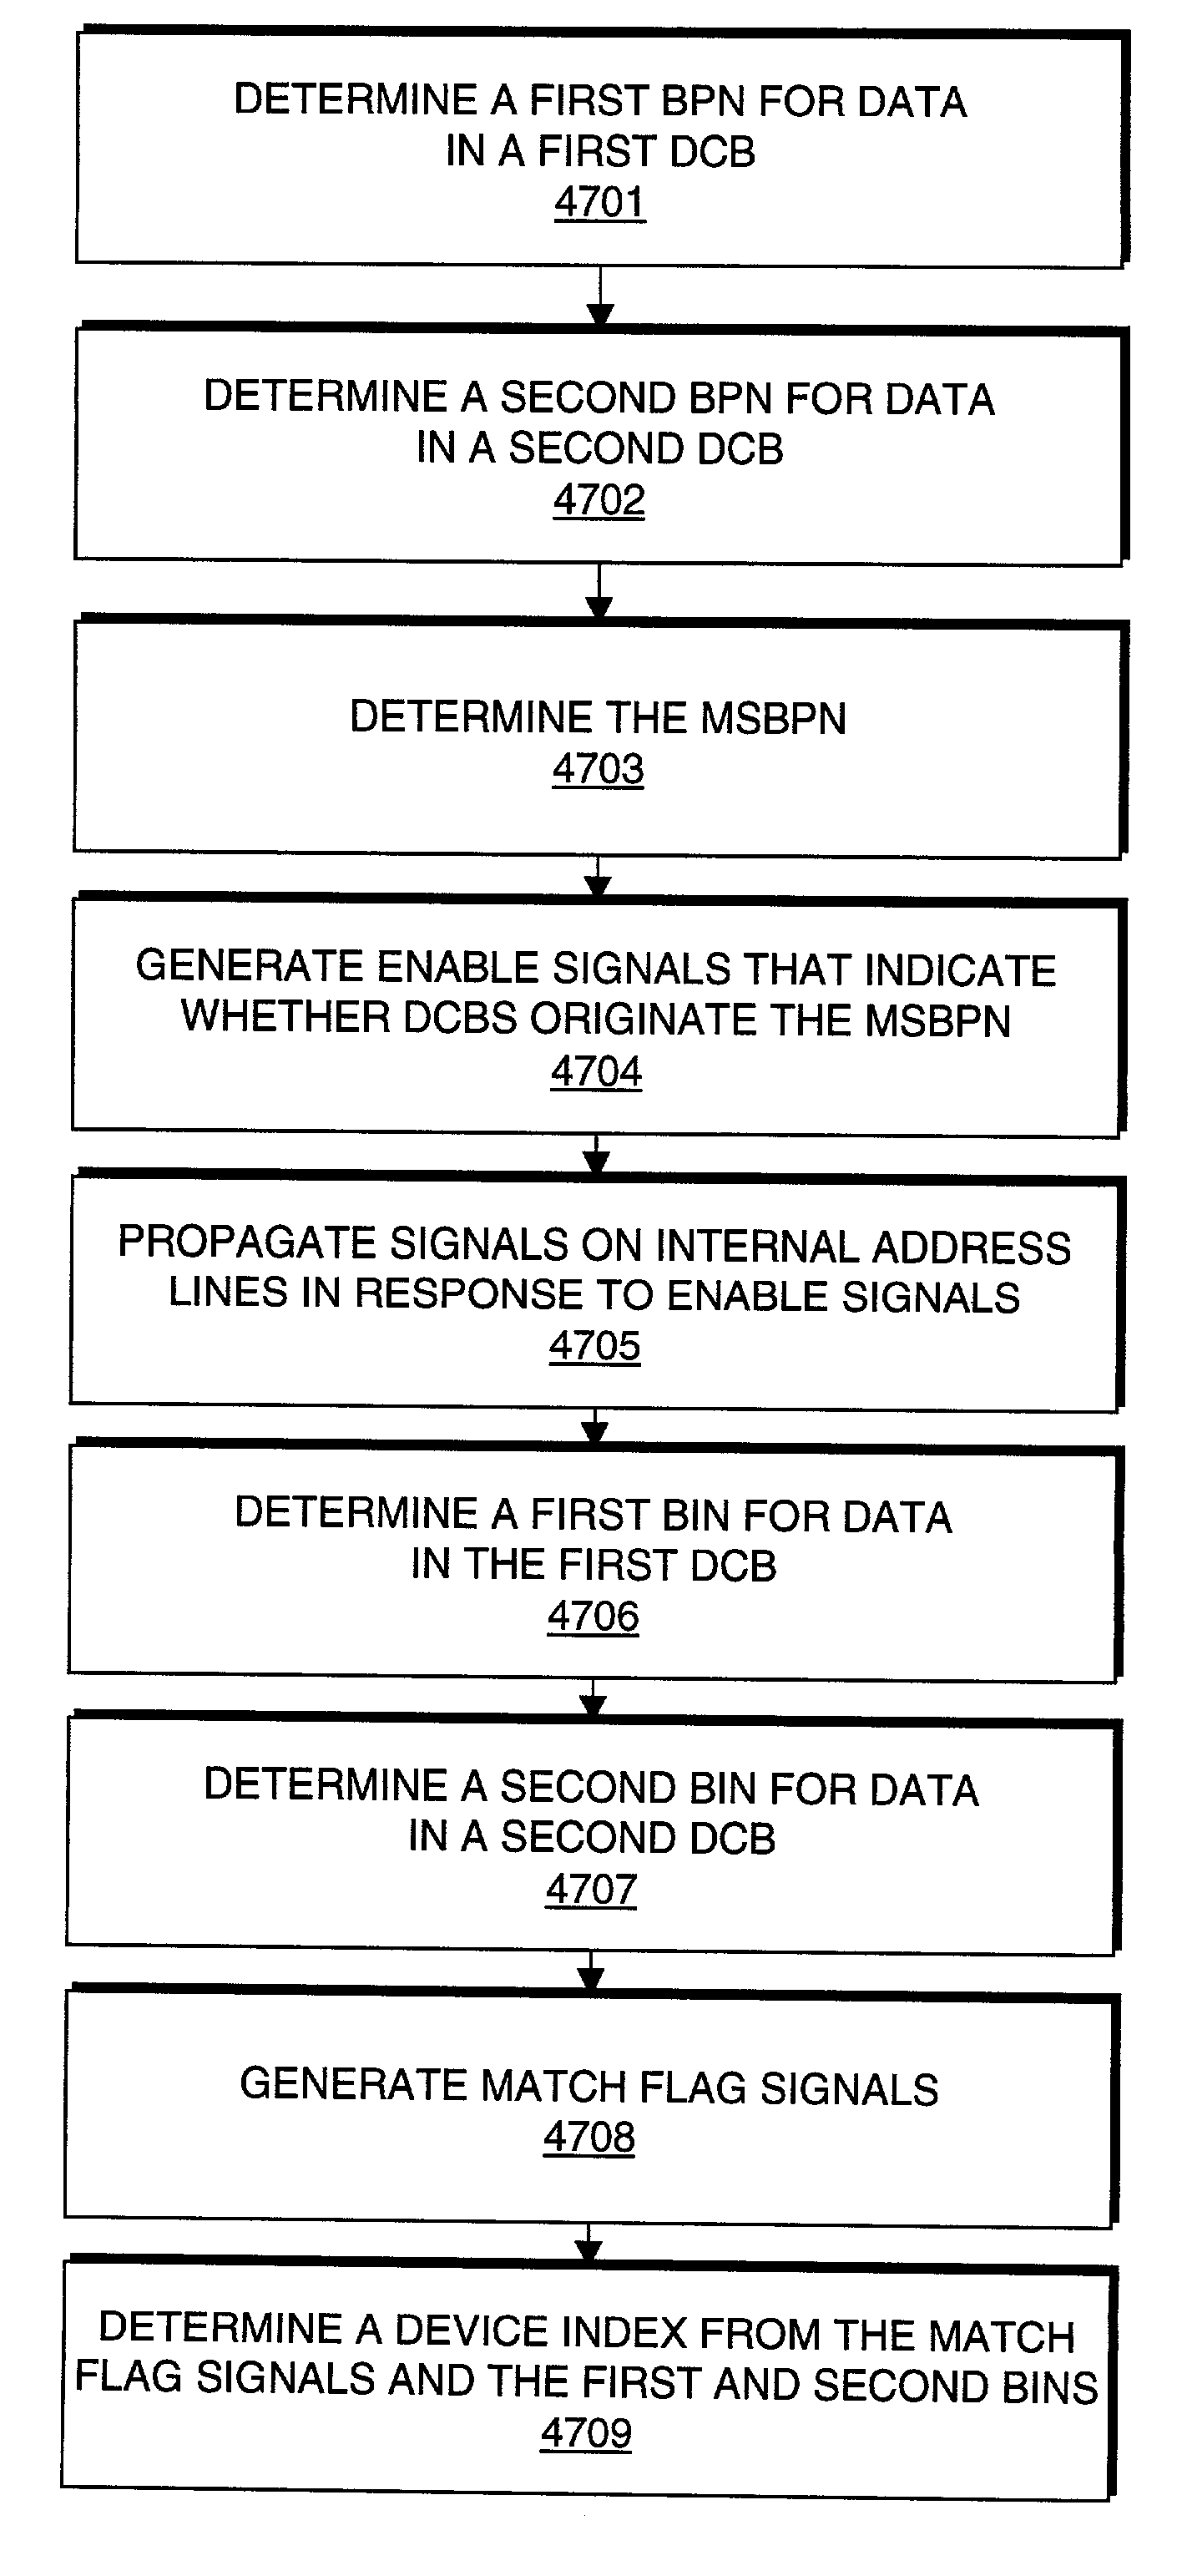 Method and apparatus for performing priority encoding in a segmented classification system using enable signals